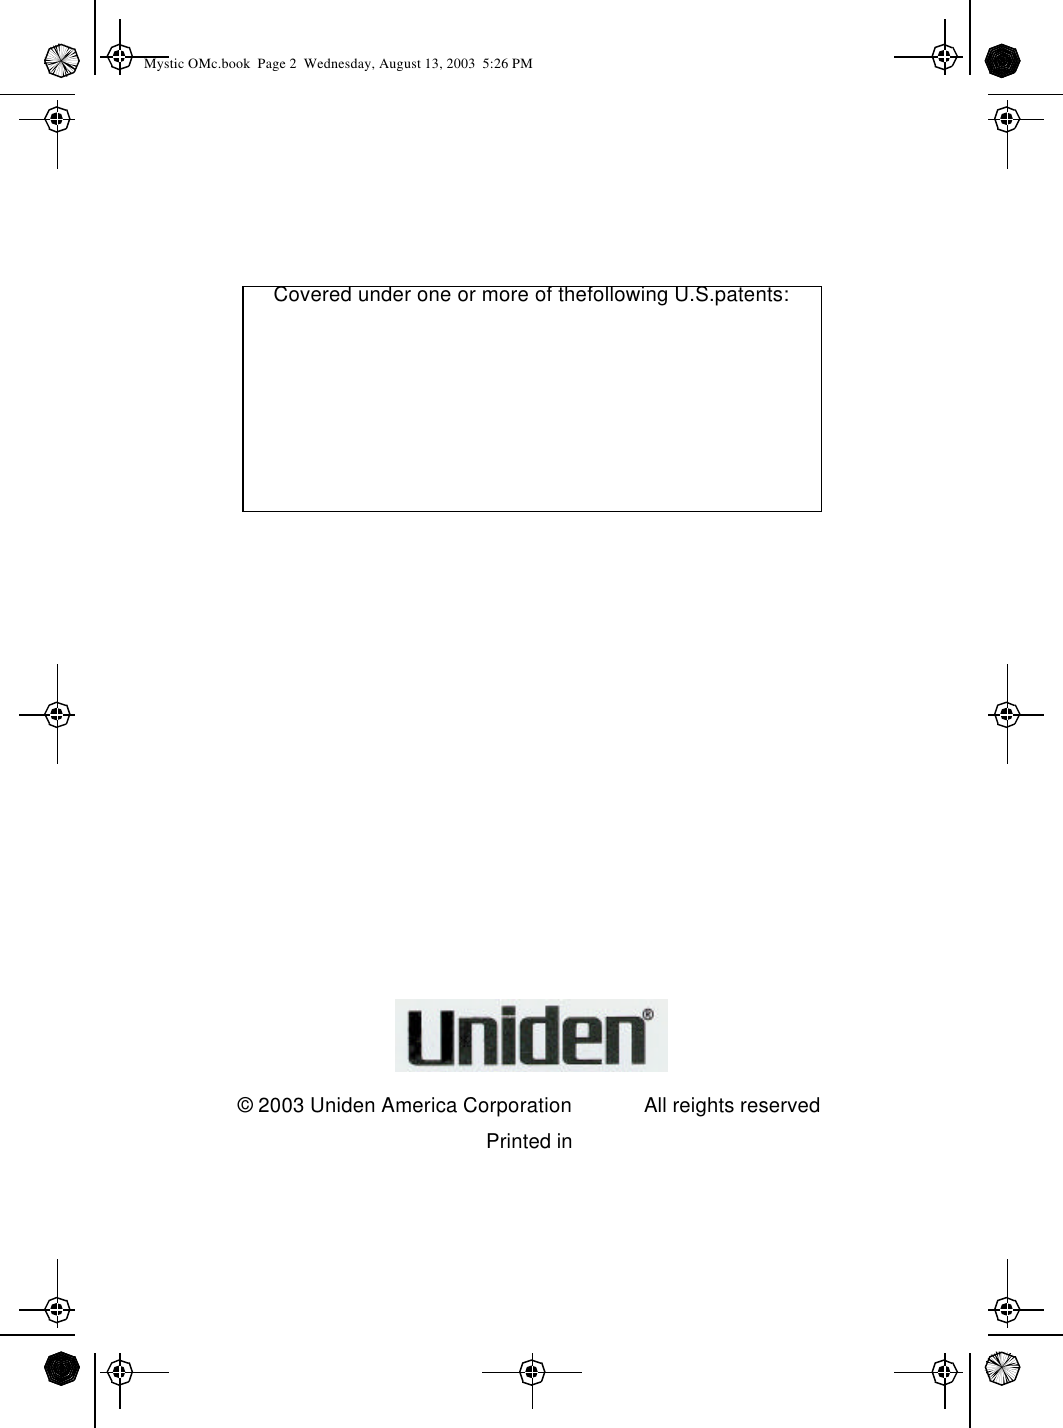 Covered under one or more of thefollowing U.S.patents:© 2003 Uniden America CorporationAll reights reservedPrinted in Mystic OMc.book  Page 2  Wednesday, August 13, 2003  5:26 PM